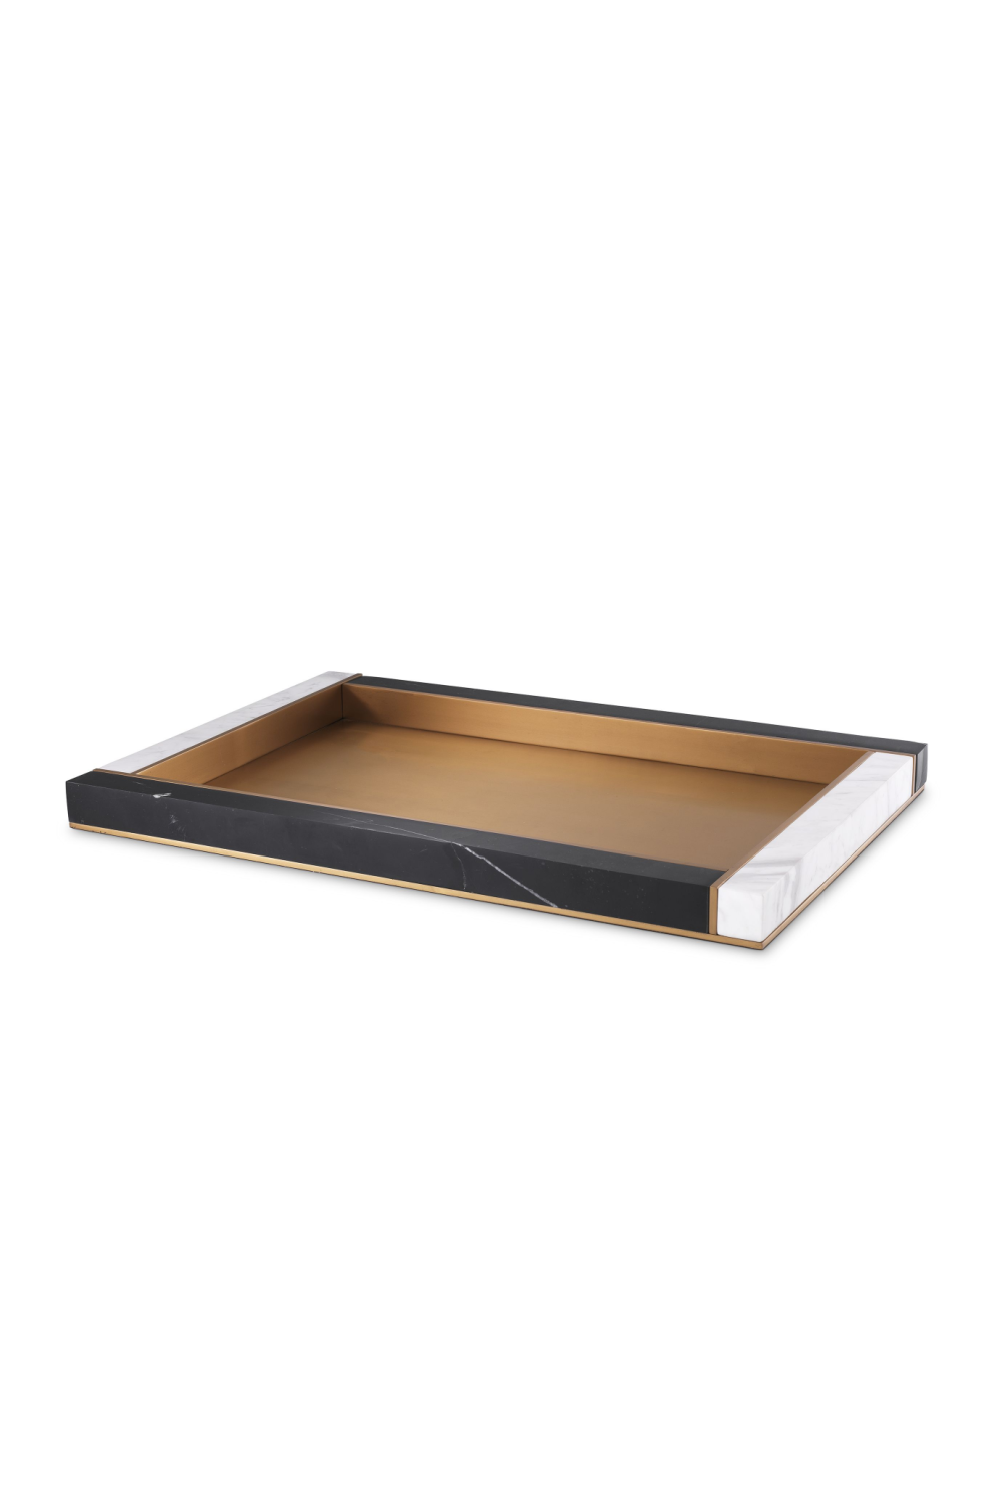 Brass and Marble Tray L | Eichholtz Farrell | OROA